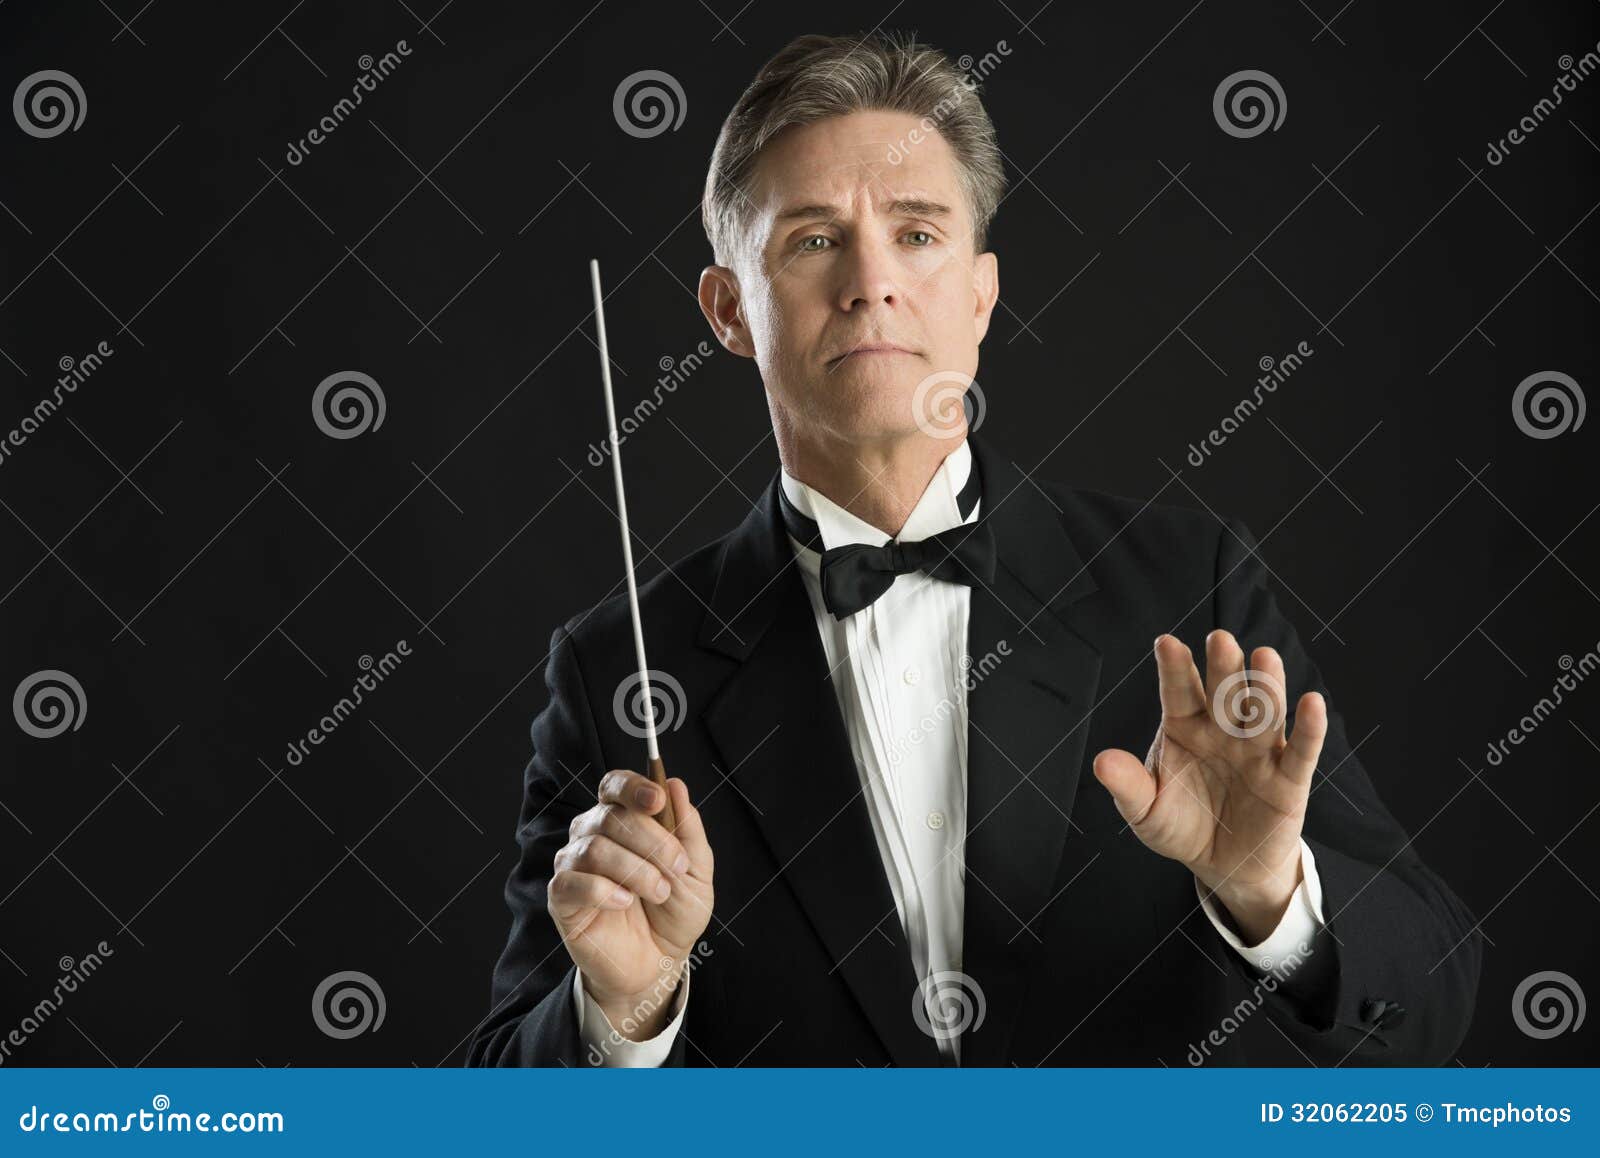 confident orchestra conductor directing with his baton